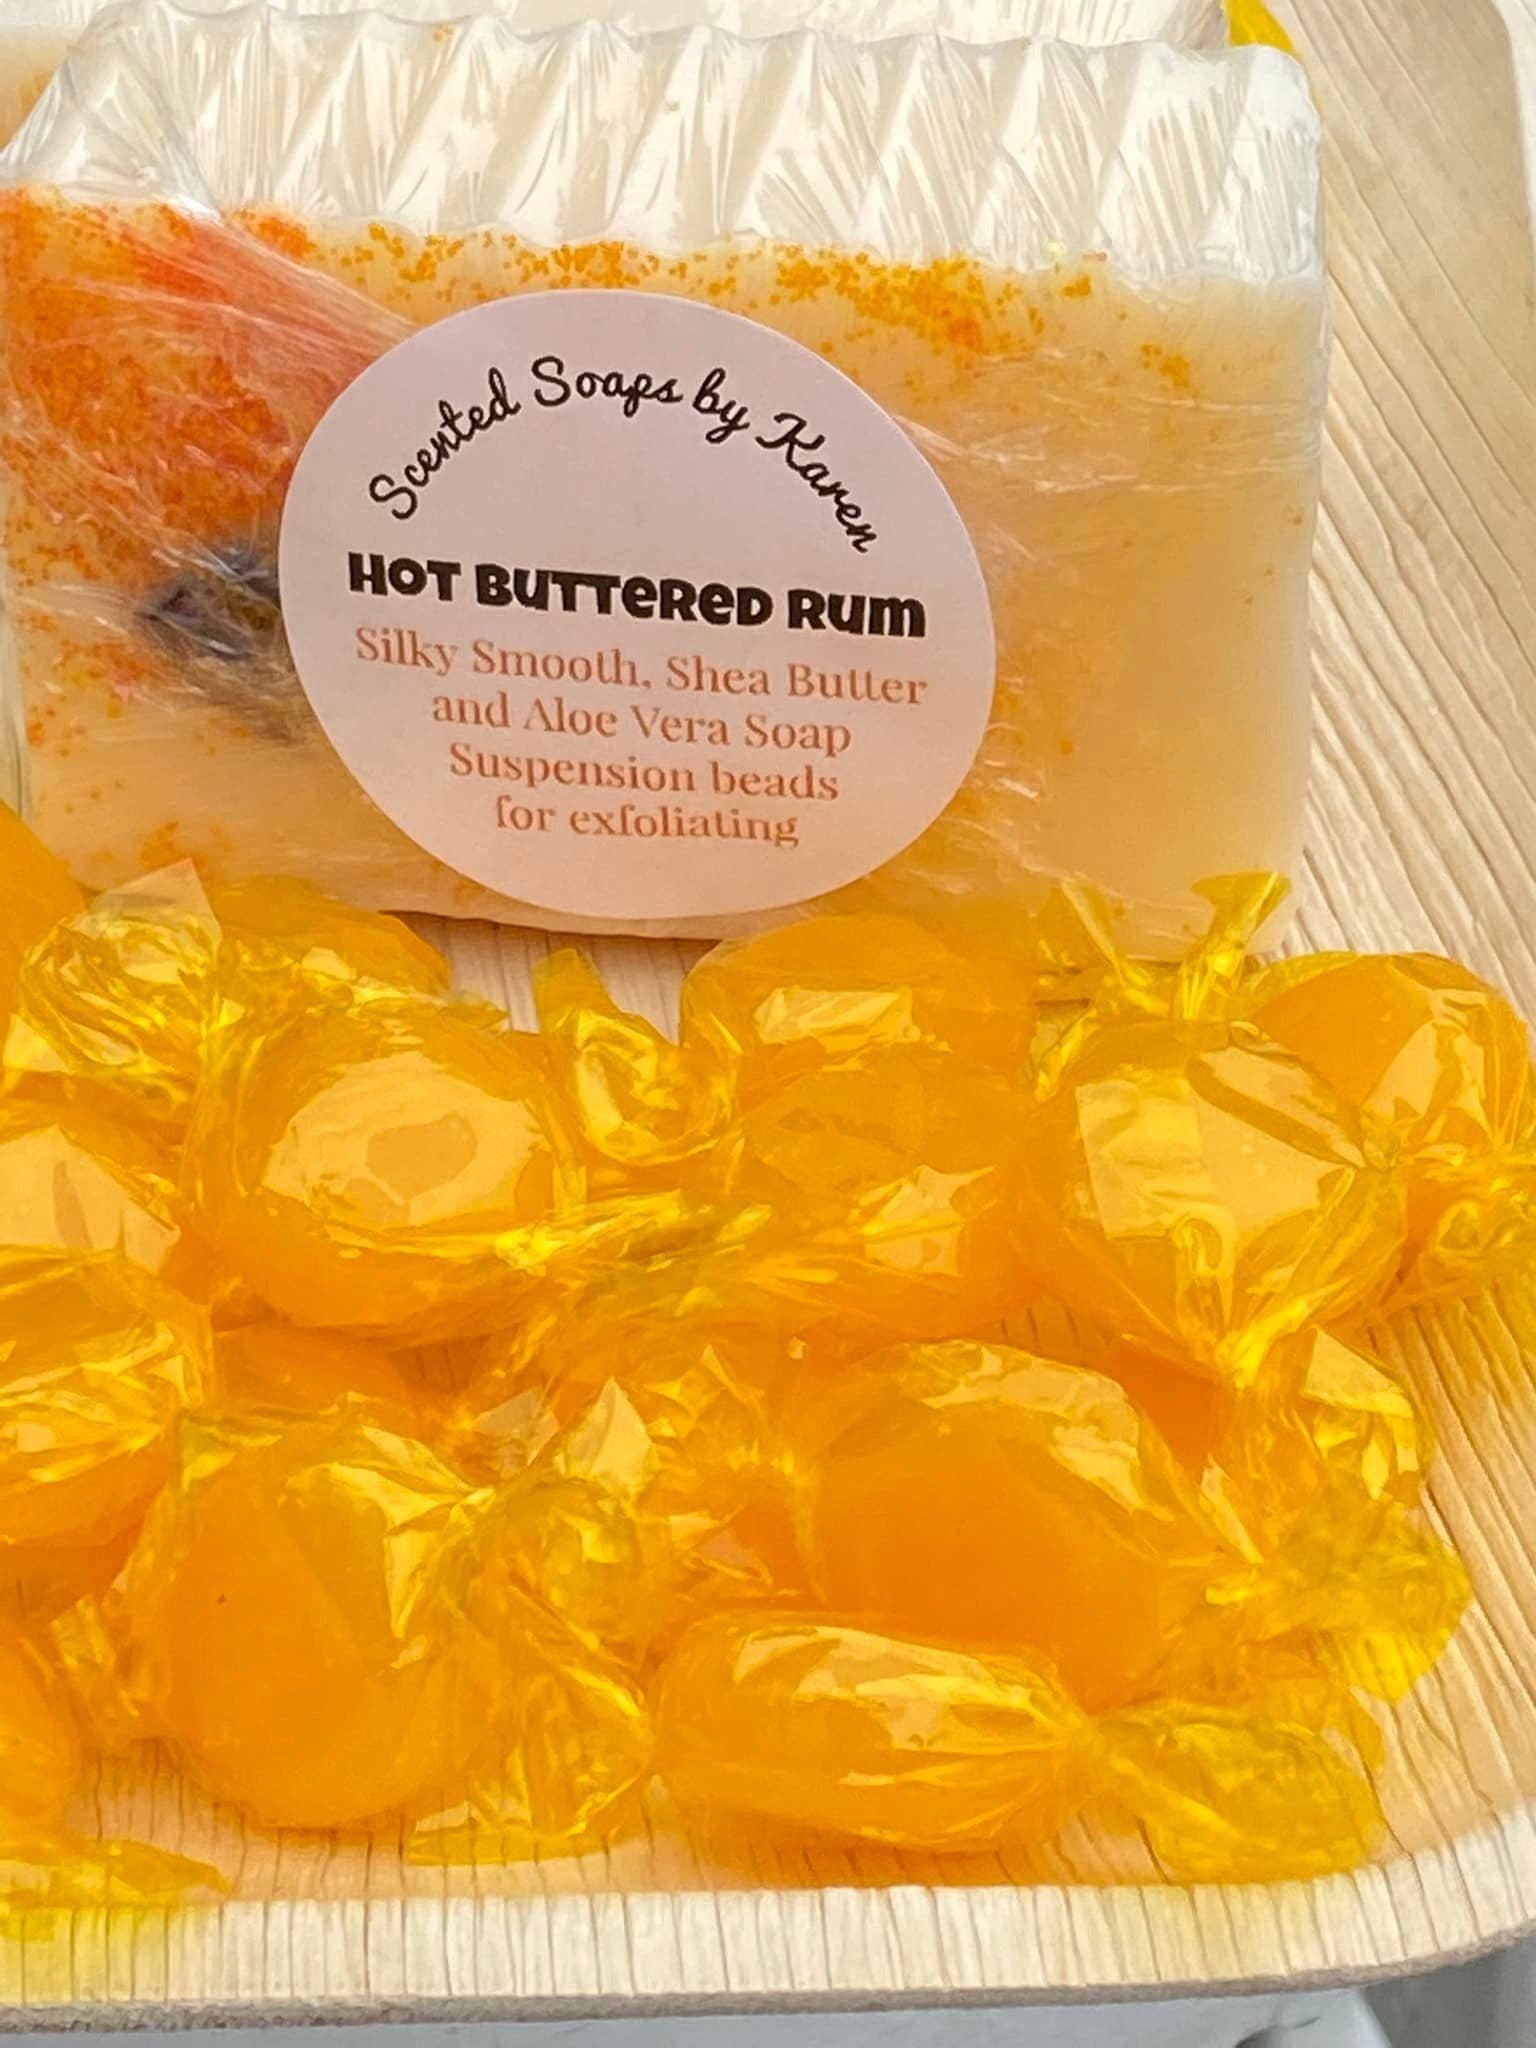 Hot Buttered Rum Shea Butter and Olive Oil Soap. Filled with orange suspension beads for easy exfoliating.